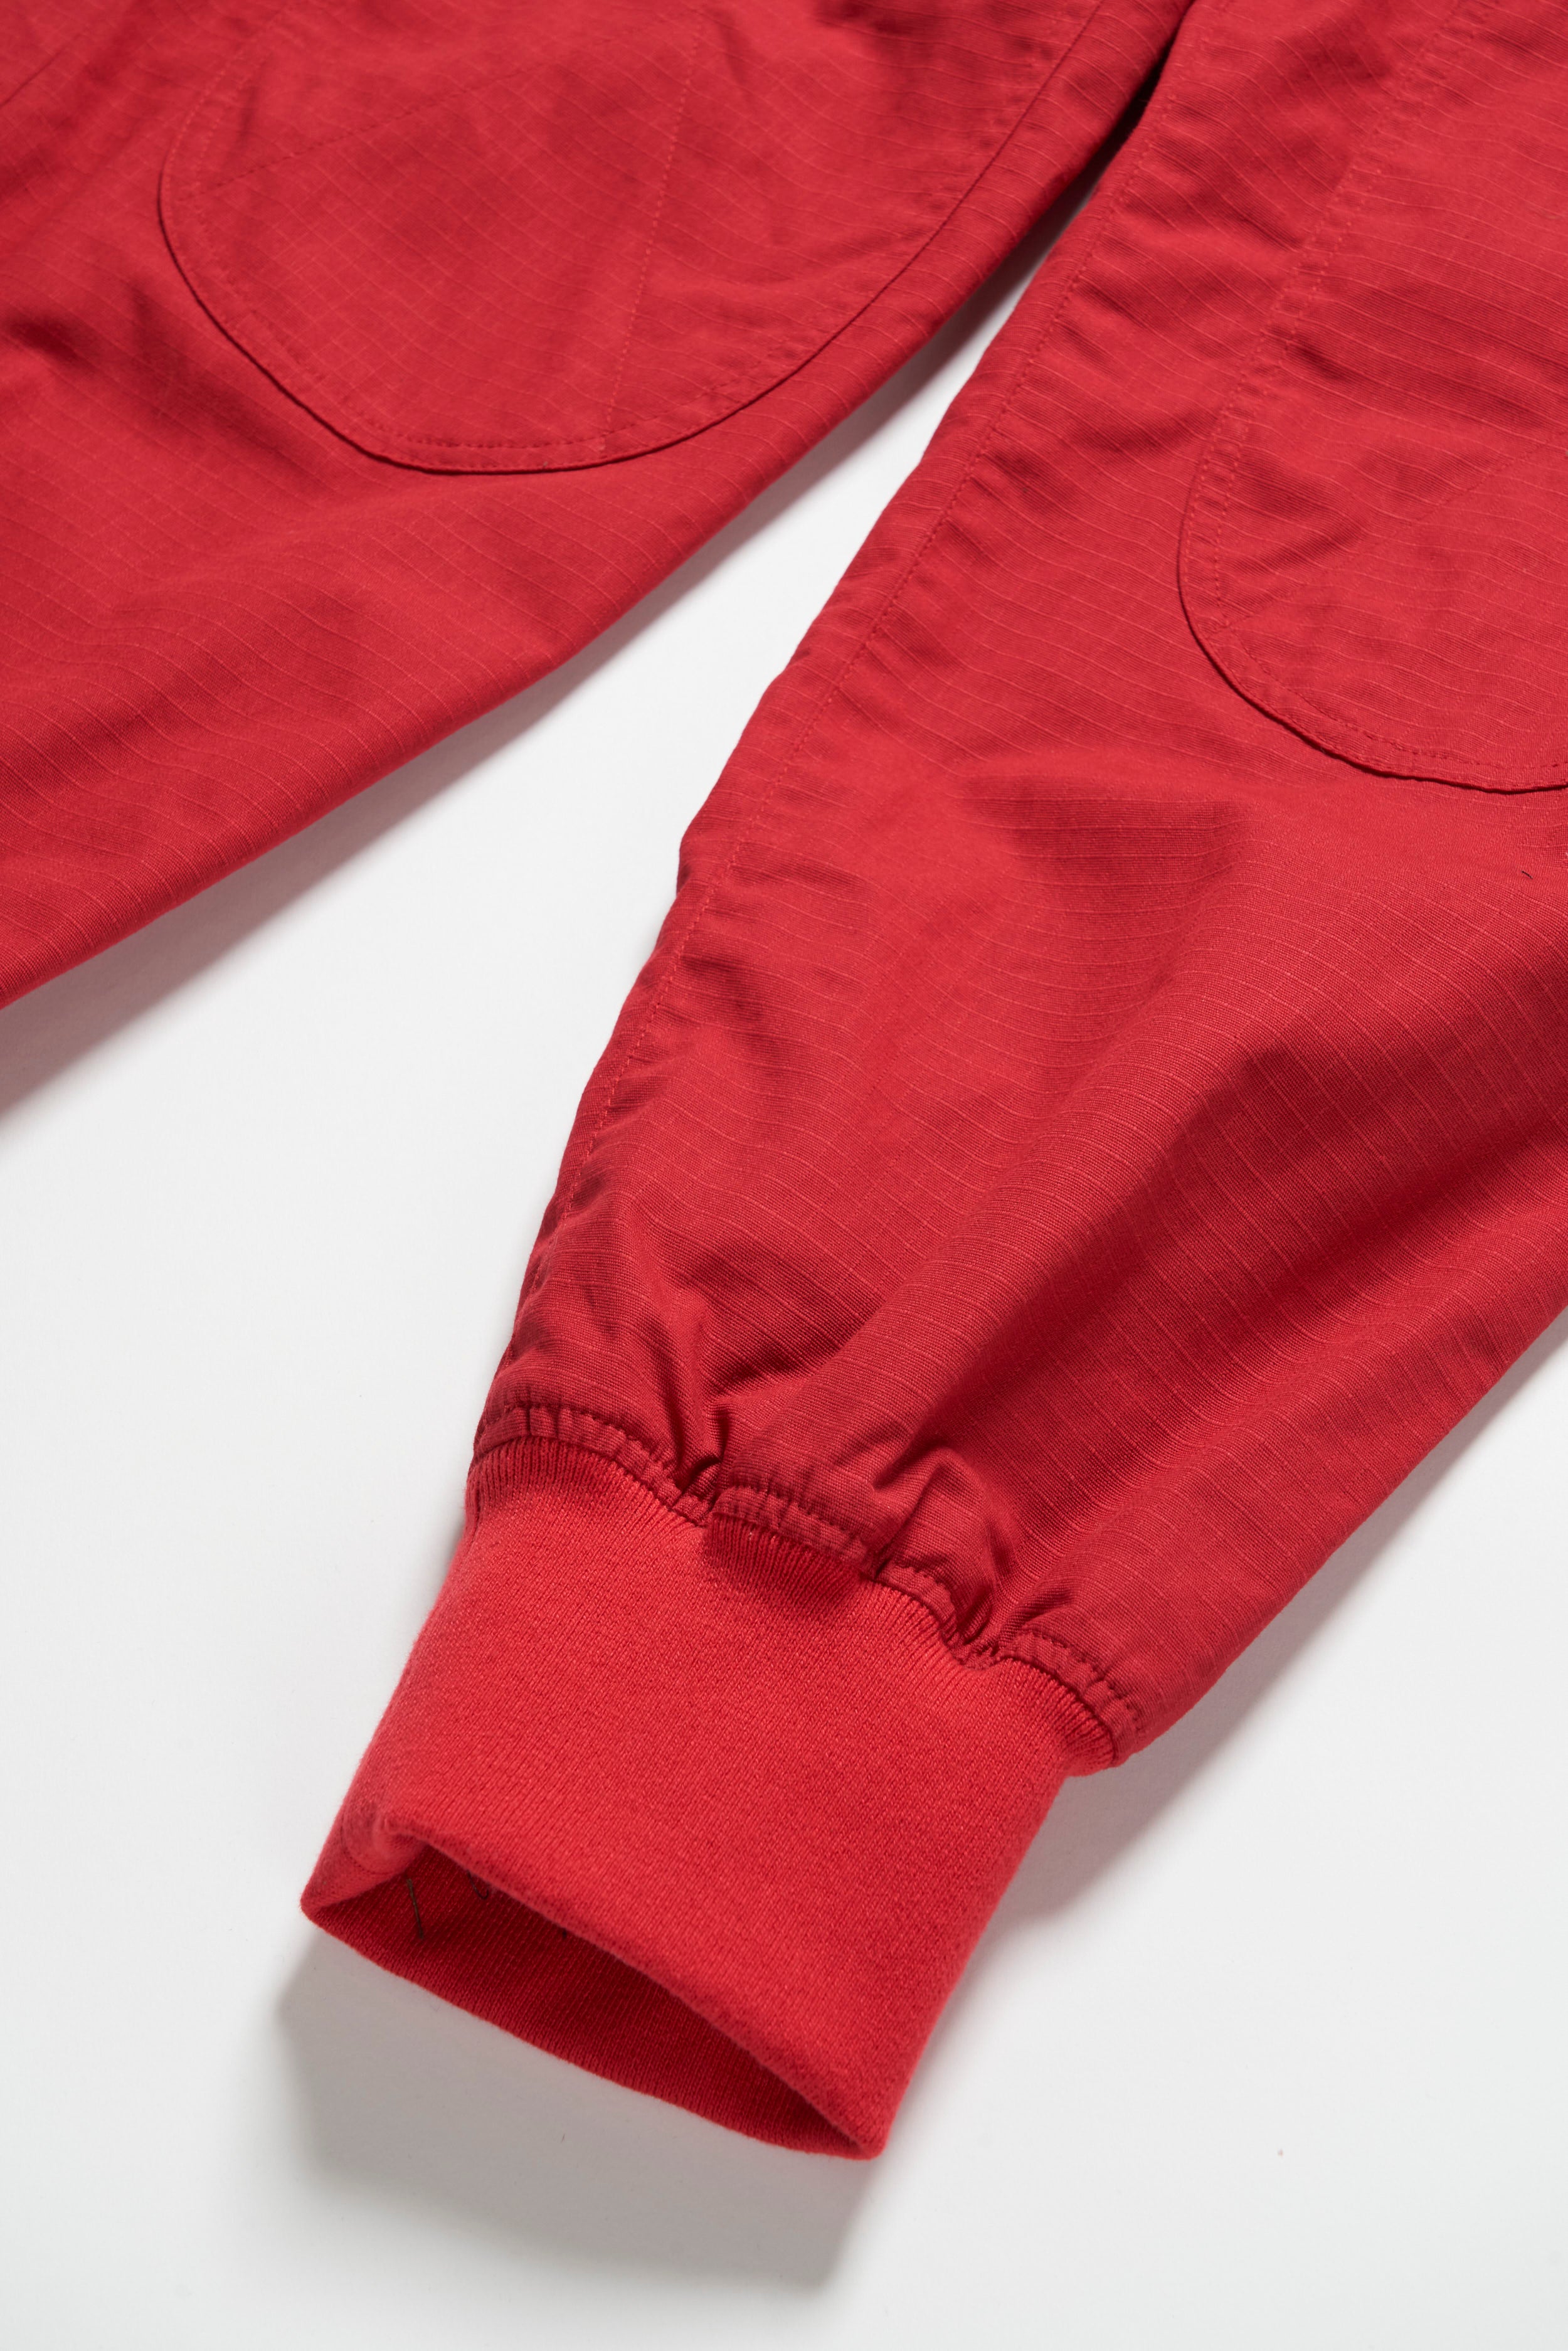 Airborne Pant - Red Cotton Ripstop